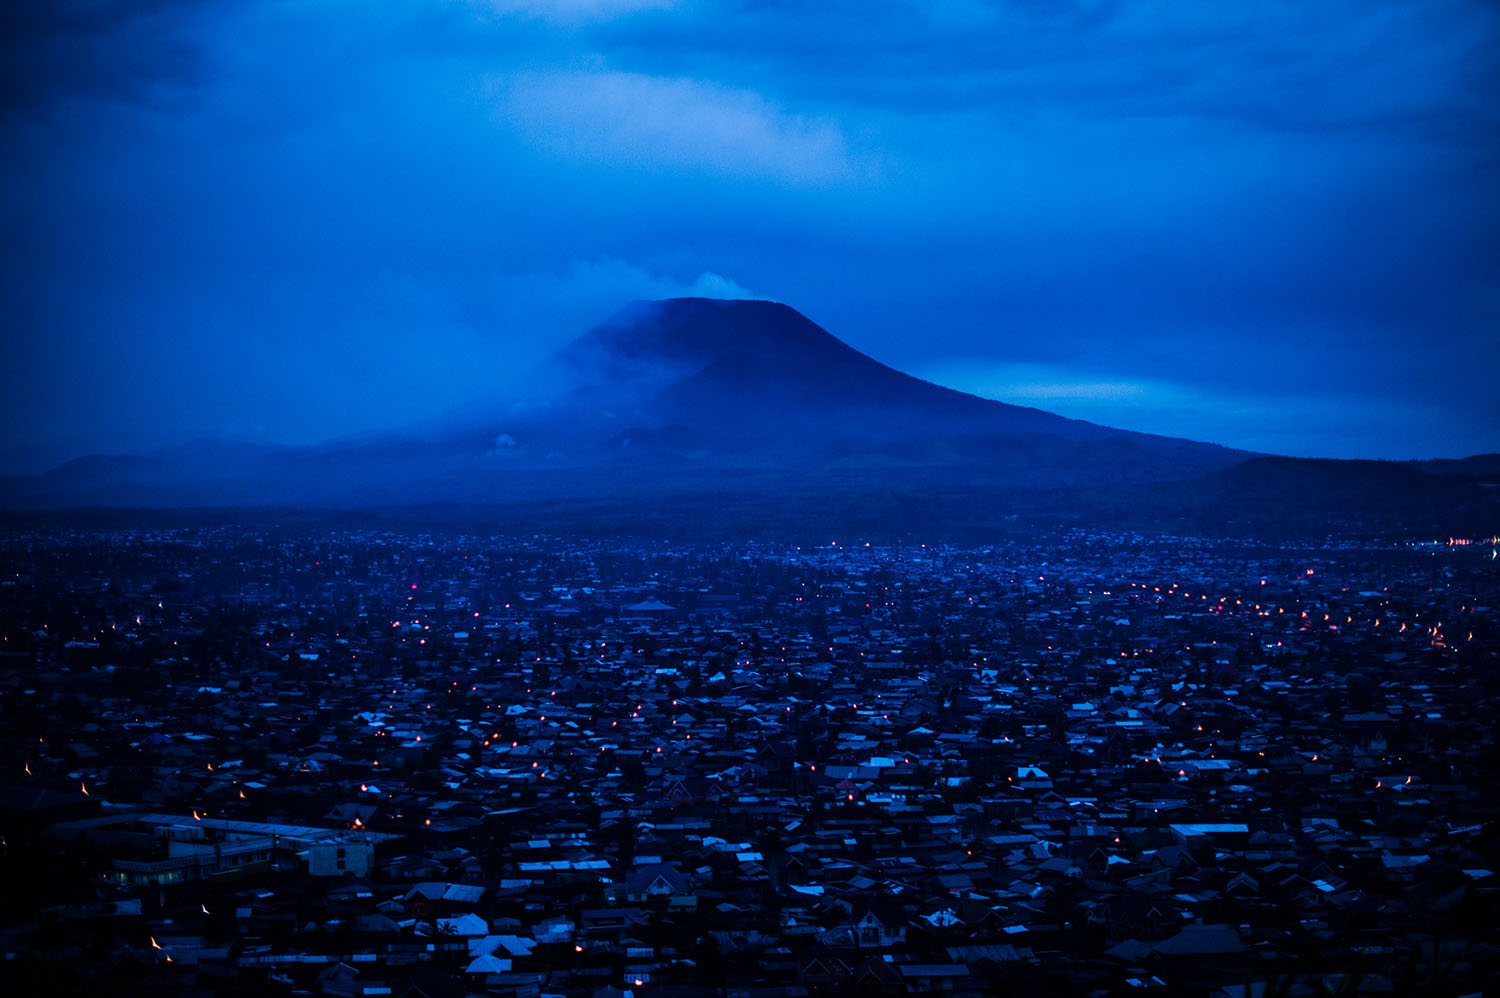 Al Jazeera: Democratic Republic of Congo's deadly volcanoThe city of Goma lies at the foot of Mount Nyiragongo, an active volcano situated around 12 miles from the city, as seen in the evening of Nov.1, 2013 in the east of the Democratic Republic of Congo. Mount Nyiragongo last erupted in 2002, destroying around 15% of the city, leaving some 120,000 people homeless.